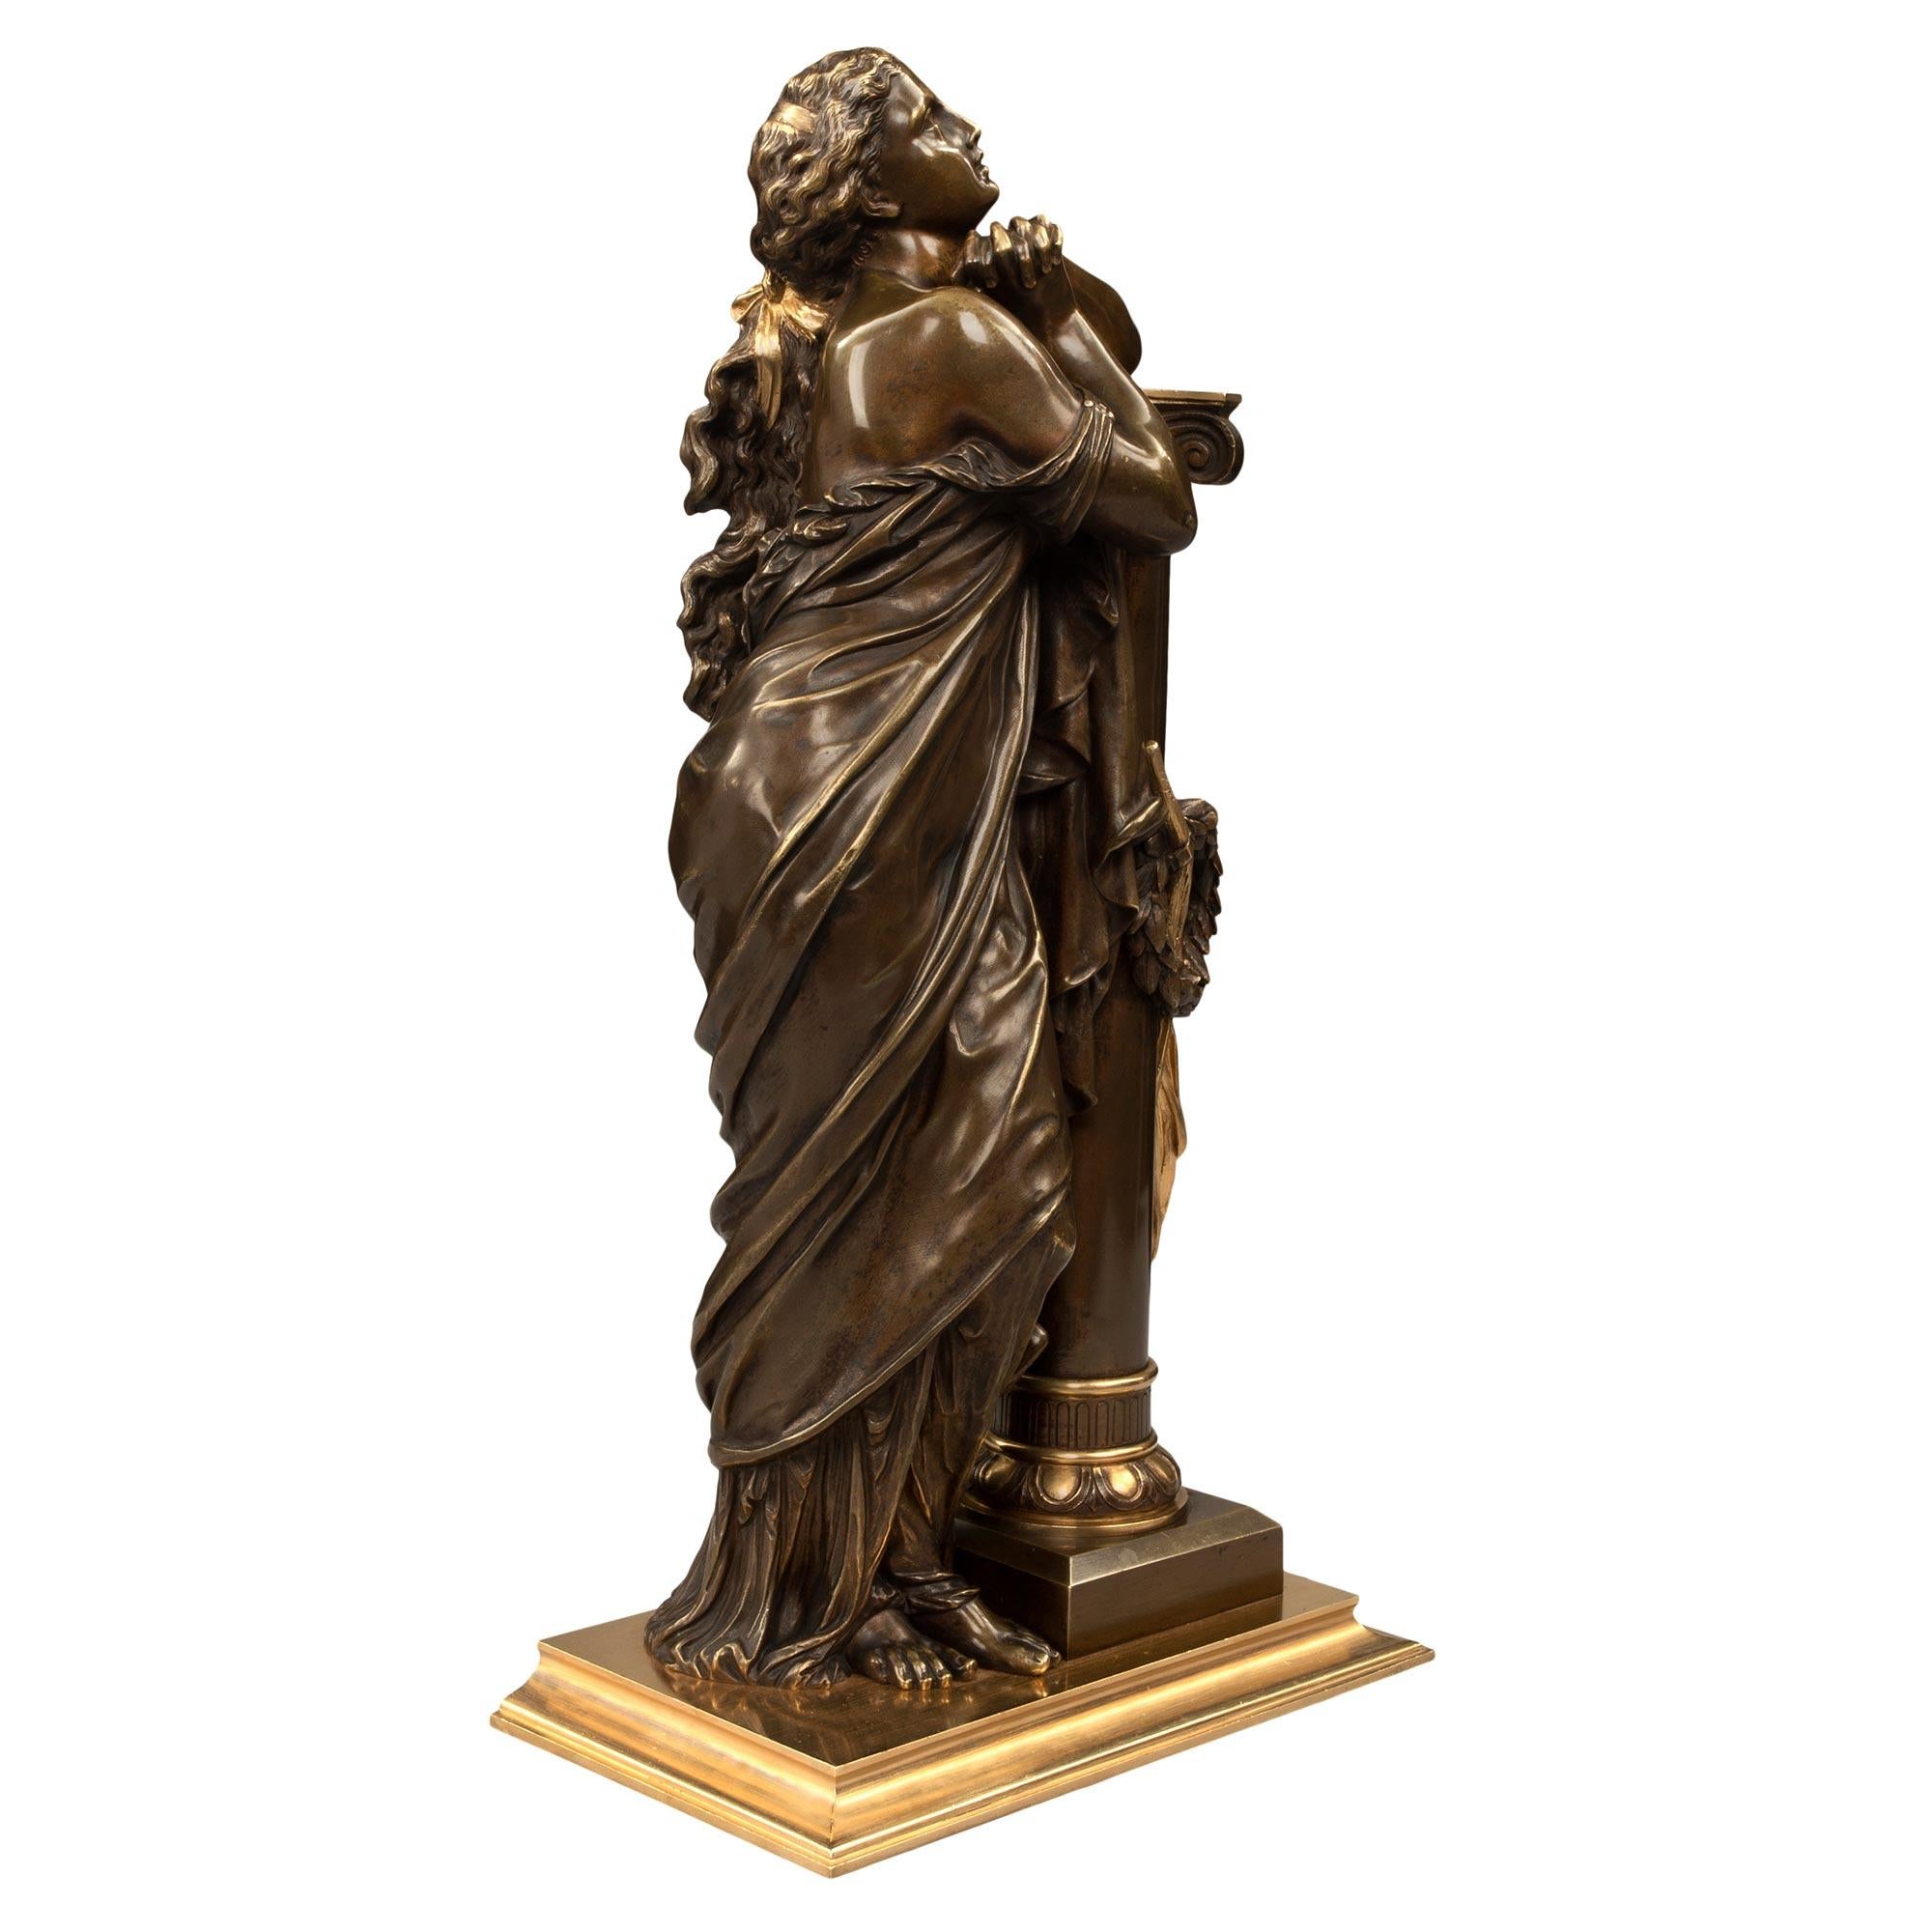 A superb and high quality French 19th century Neo-Classical st. patinated bronze and ormolu statue. The statue is raised by a rectangular ormolu base with a most elegant and decorative mottled border. Above is a beautiful maiden draped in a